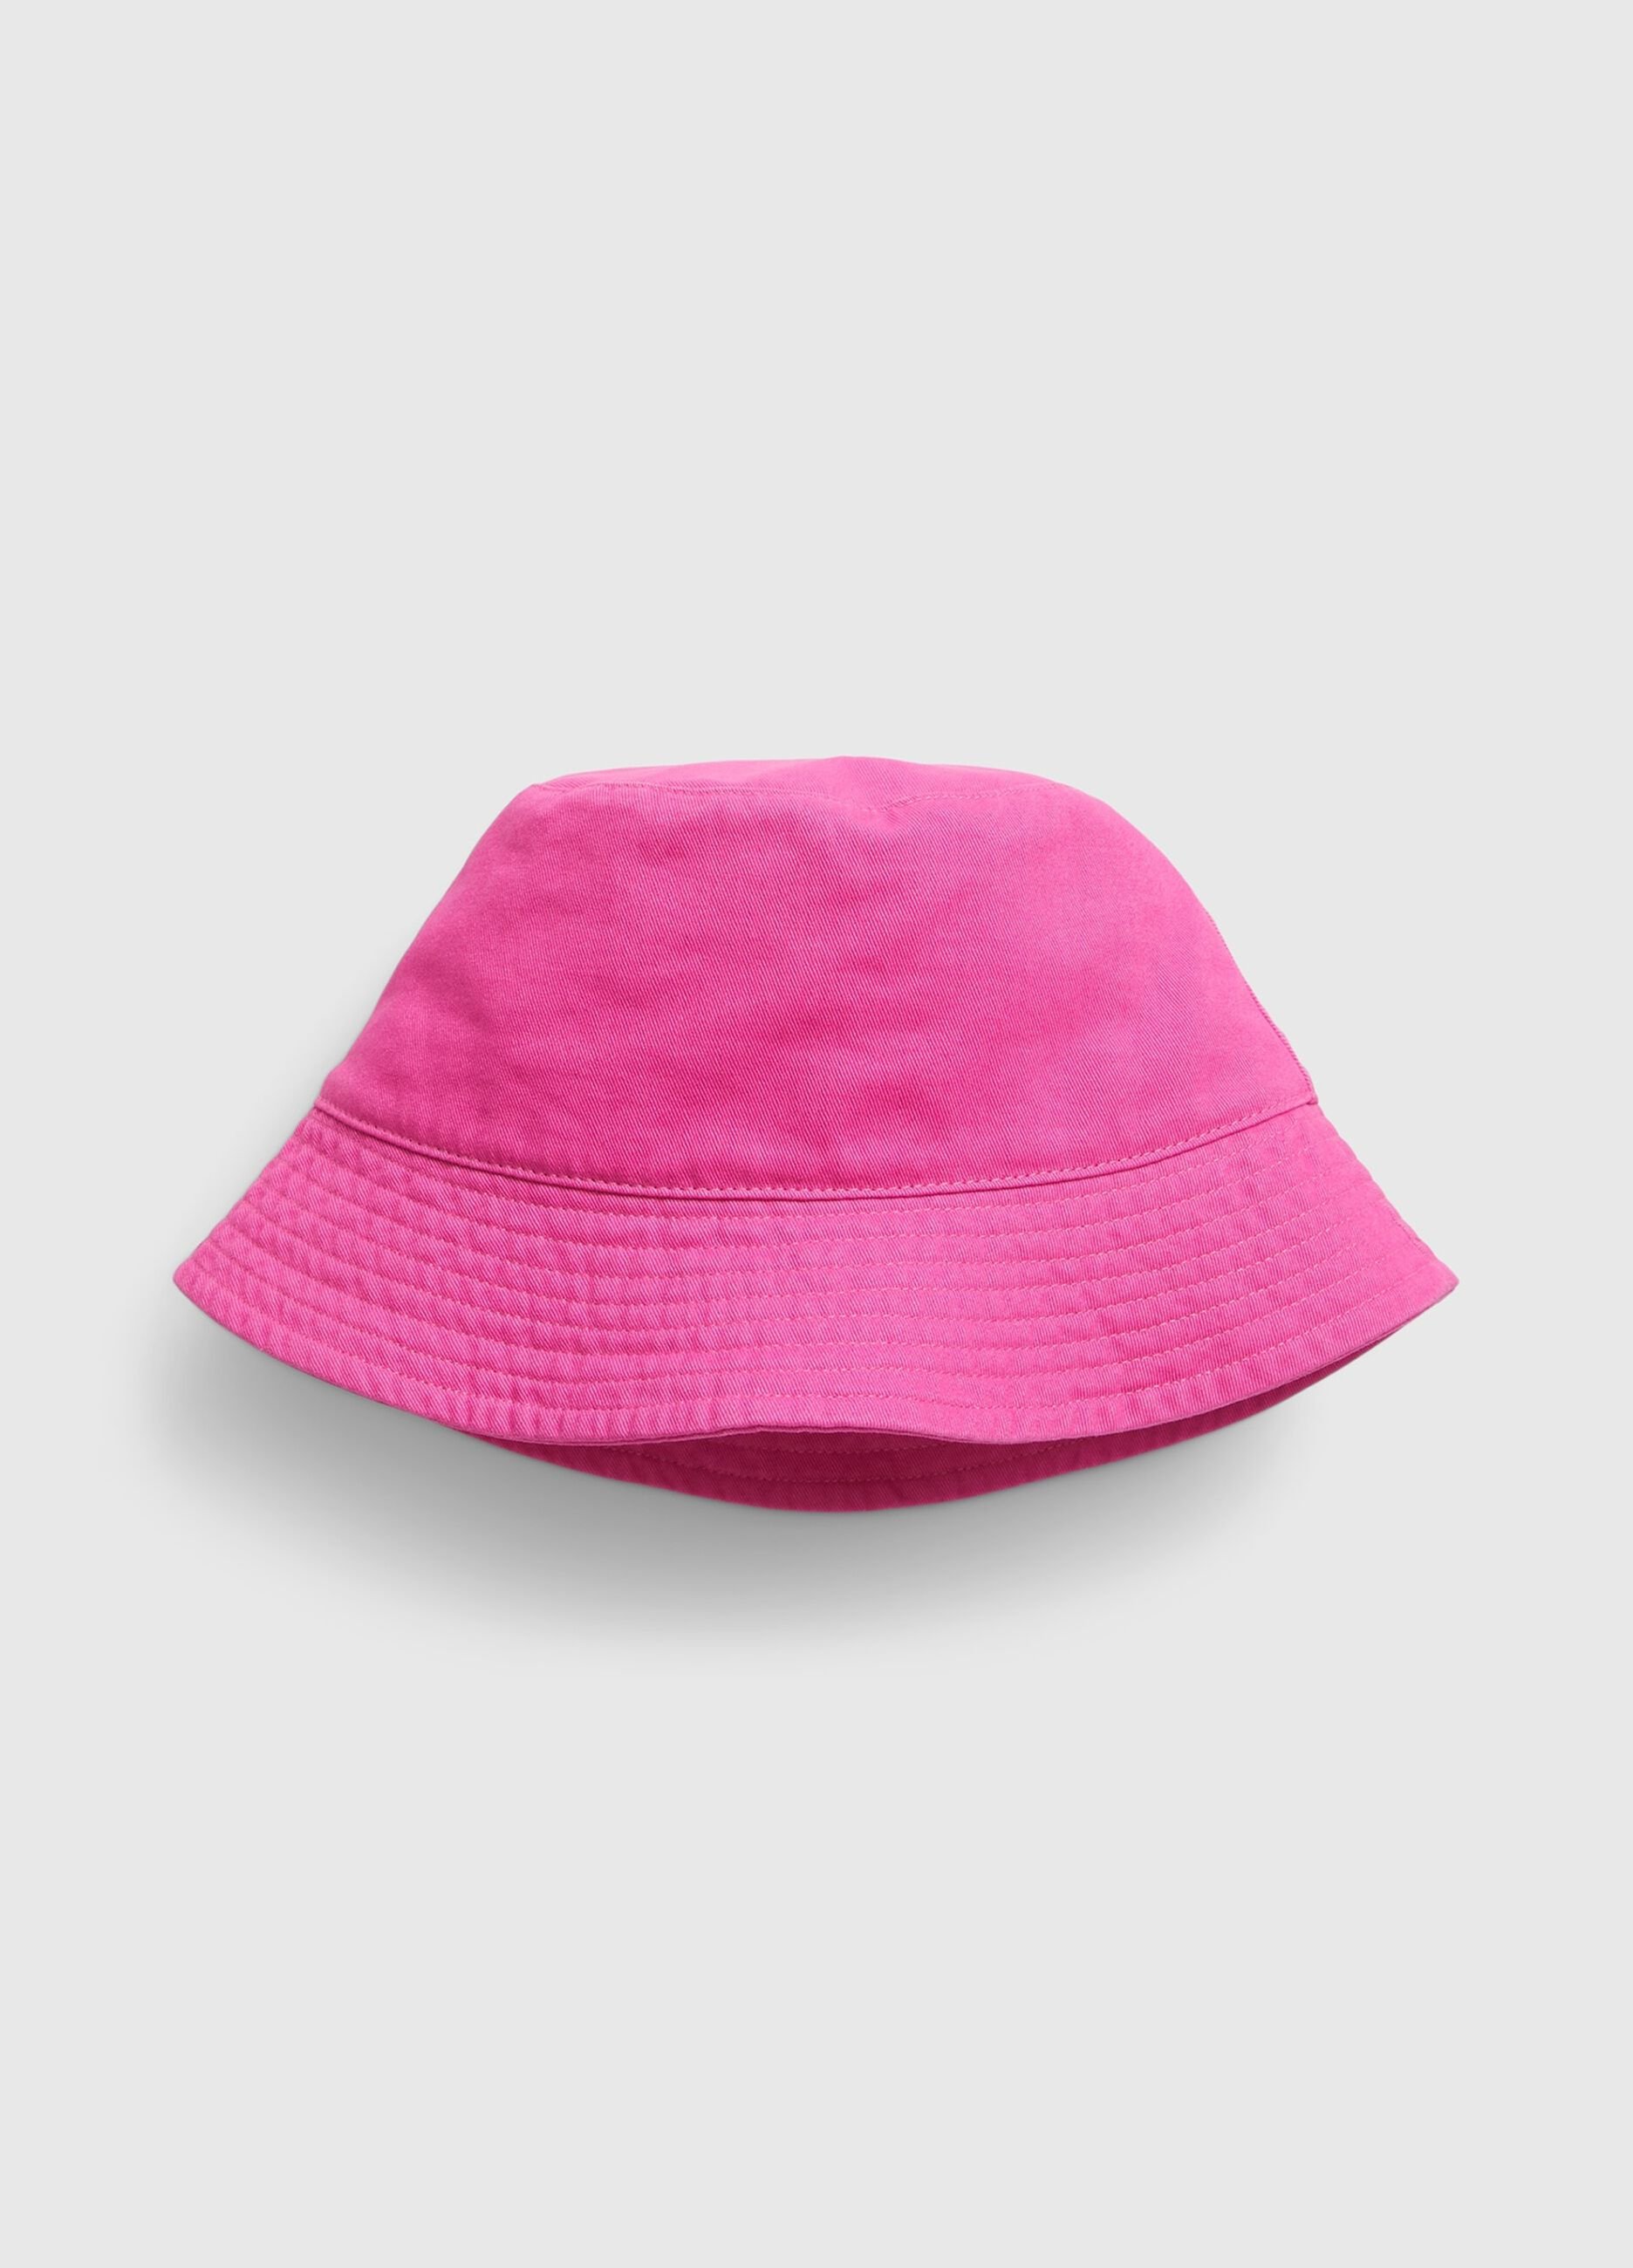 GAP Woman's Raspberry Fishing hat with logo embroidery